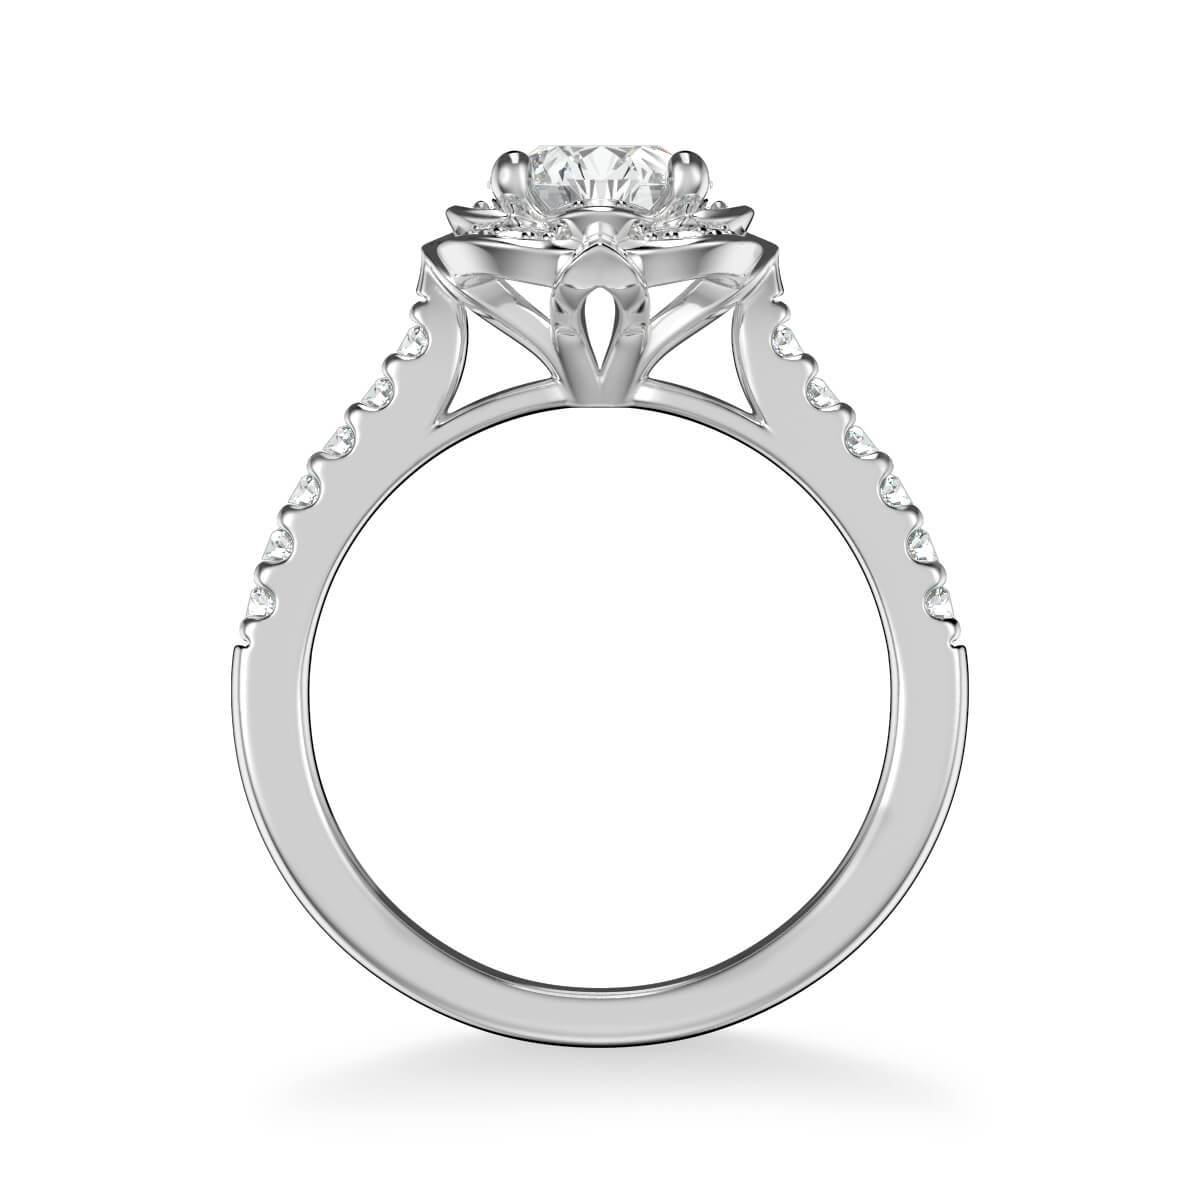 Skyler Contemporary Floral Halo Diamond Engagement Ring